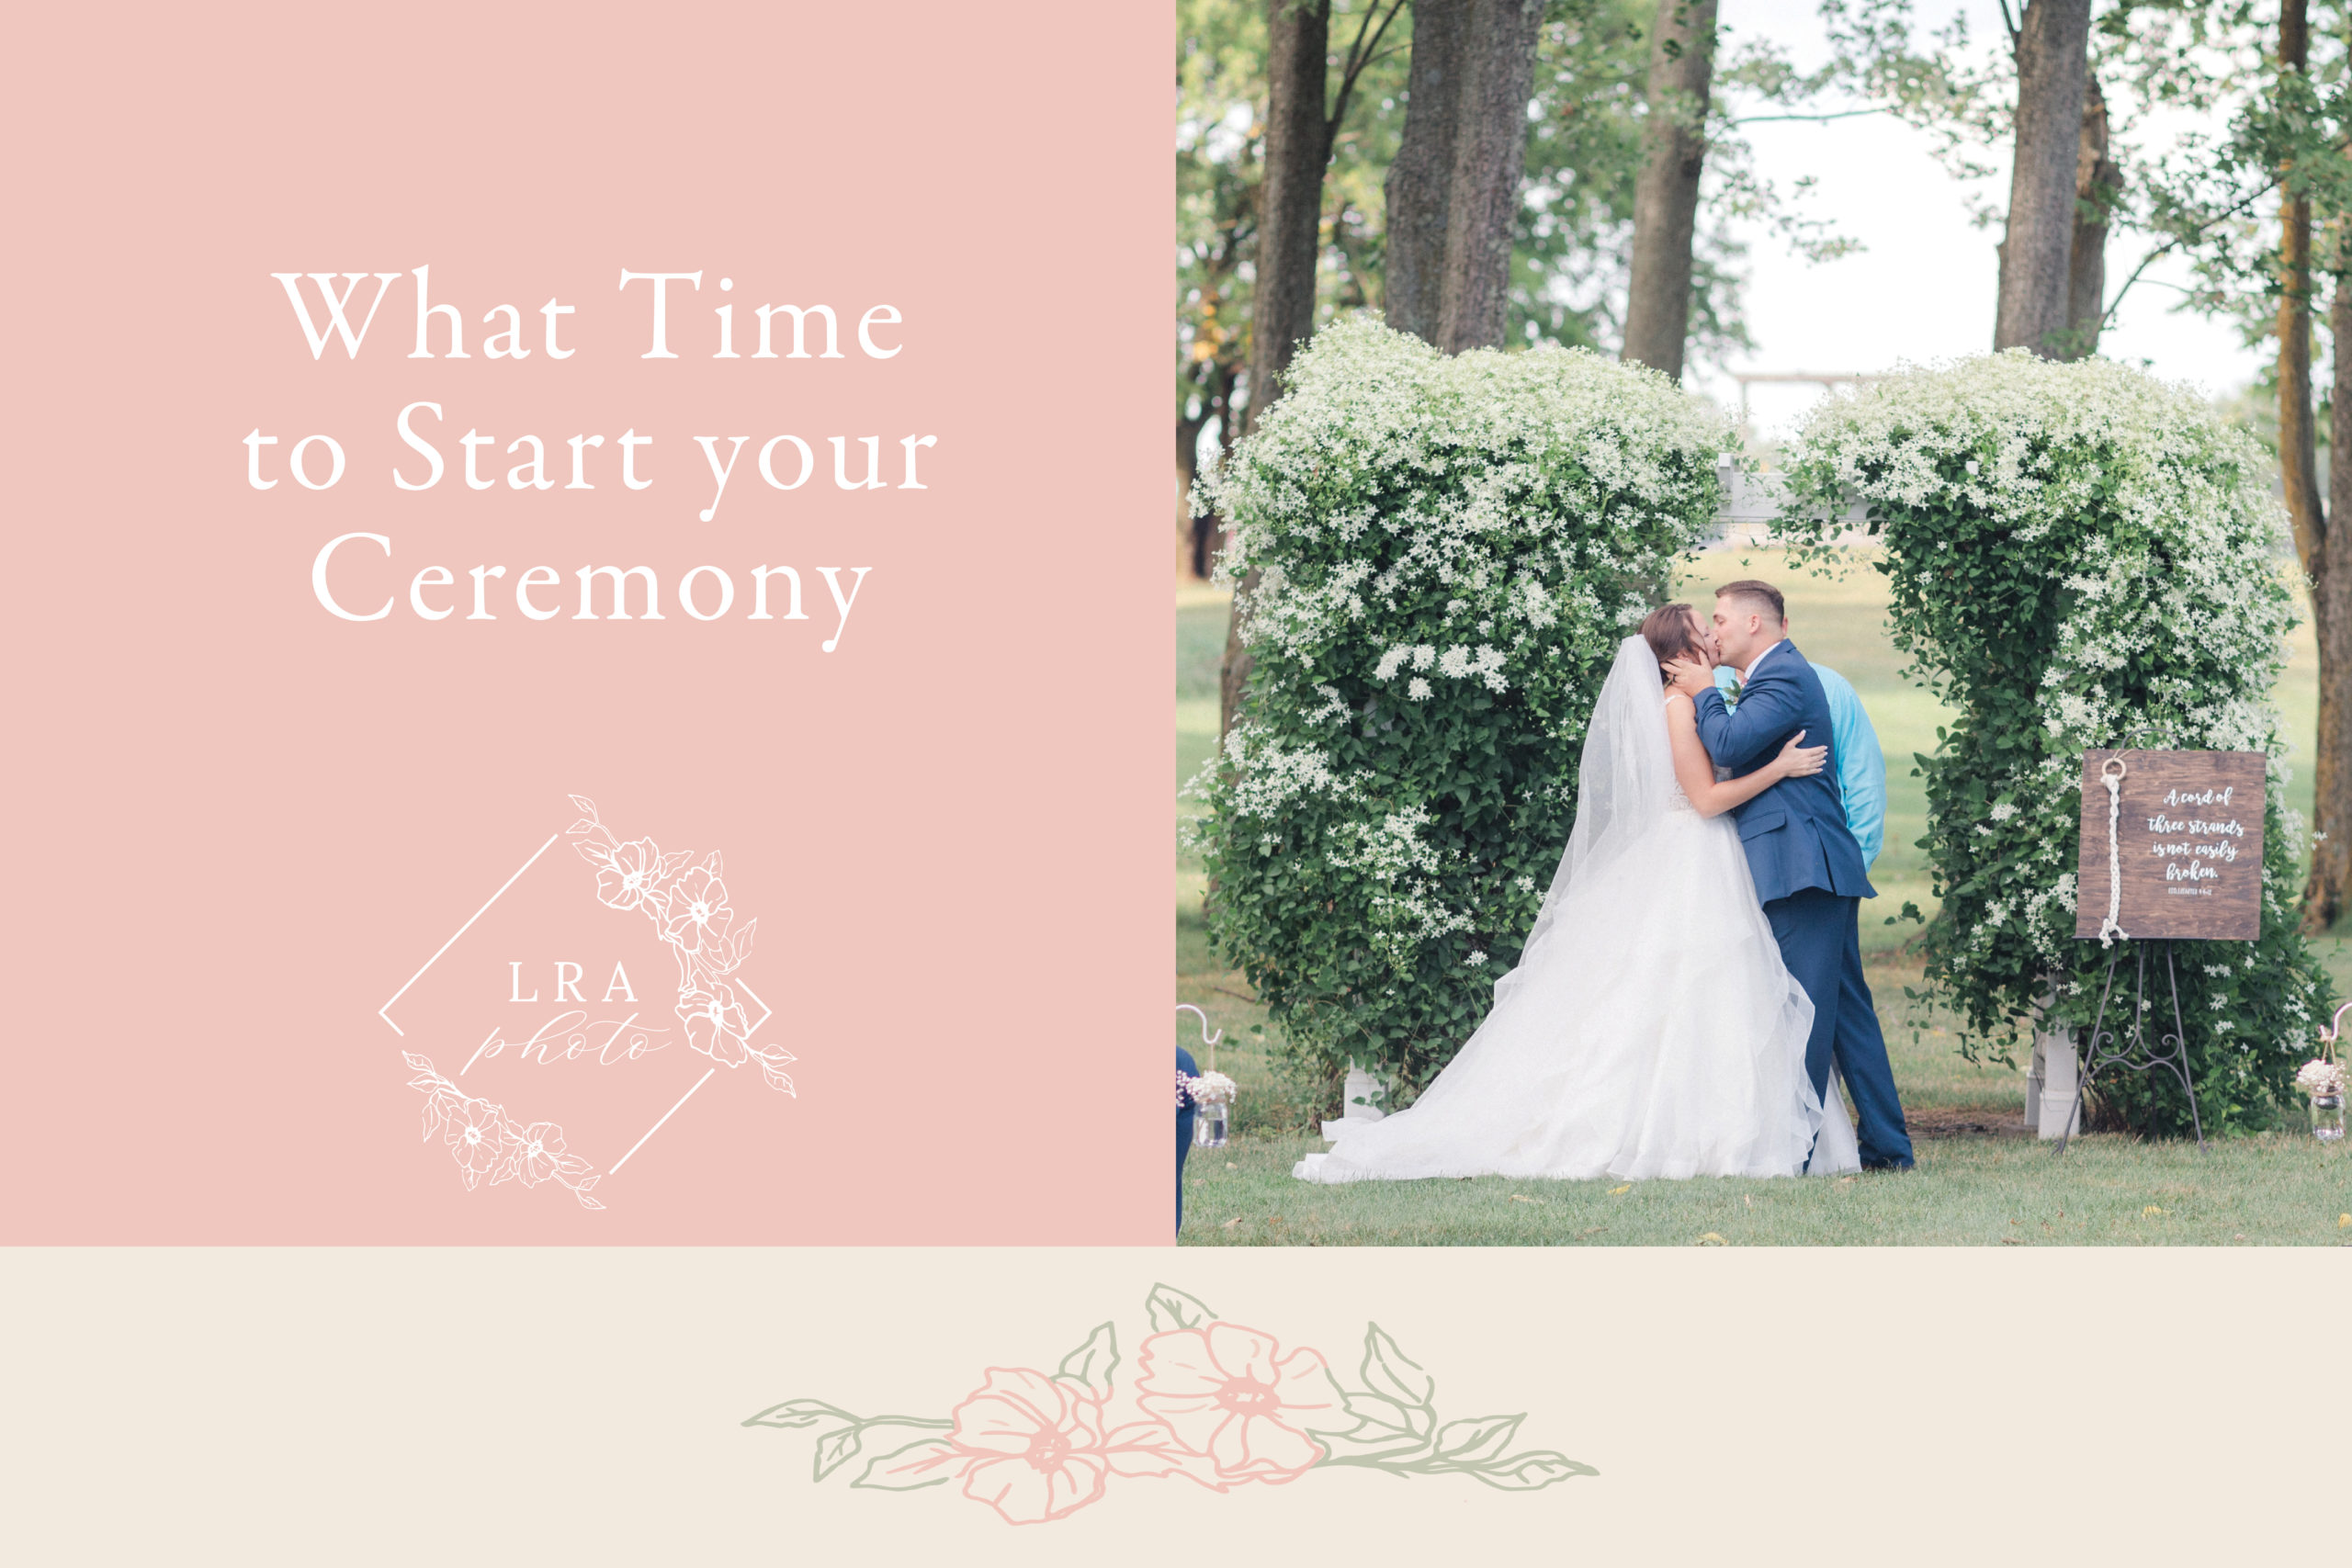 What Time to Start Your Ceremony